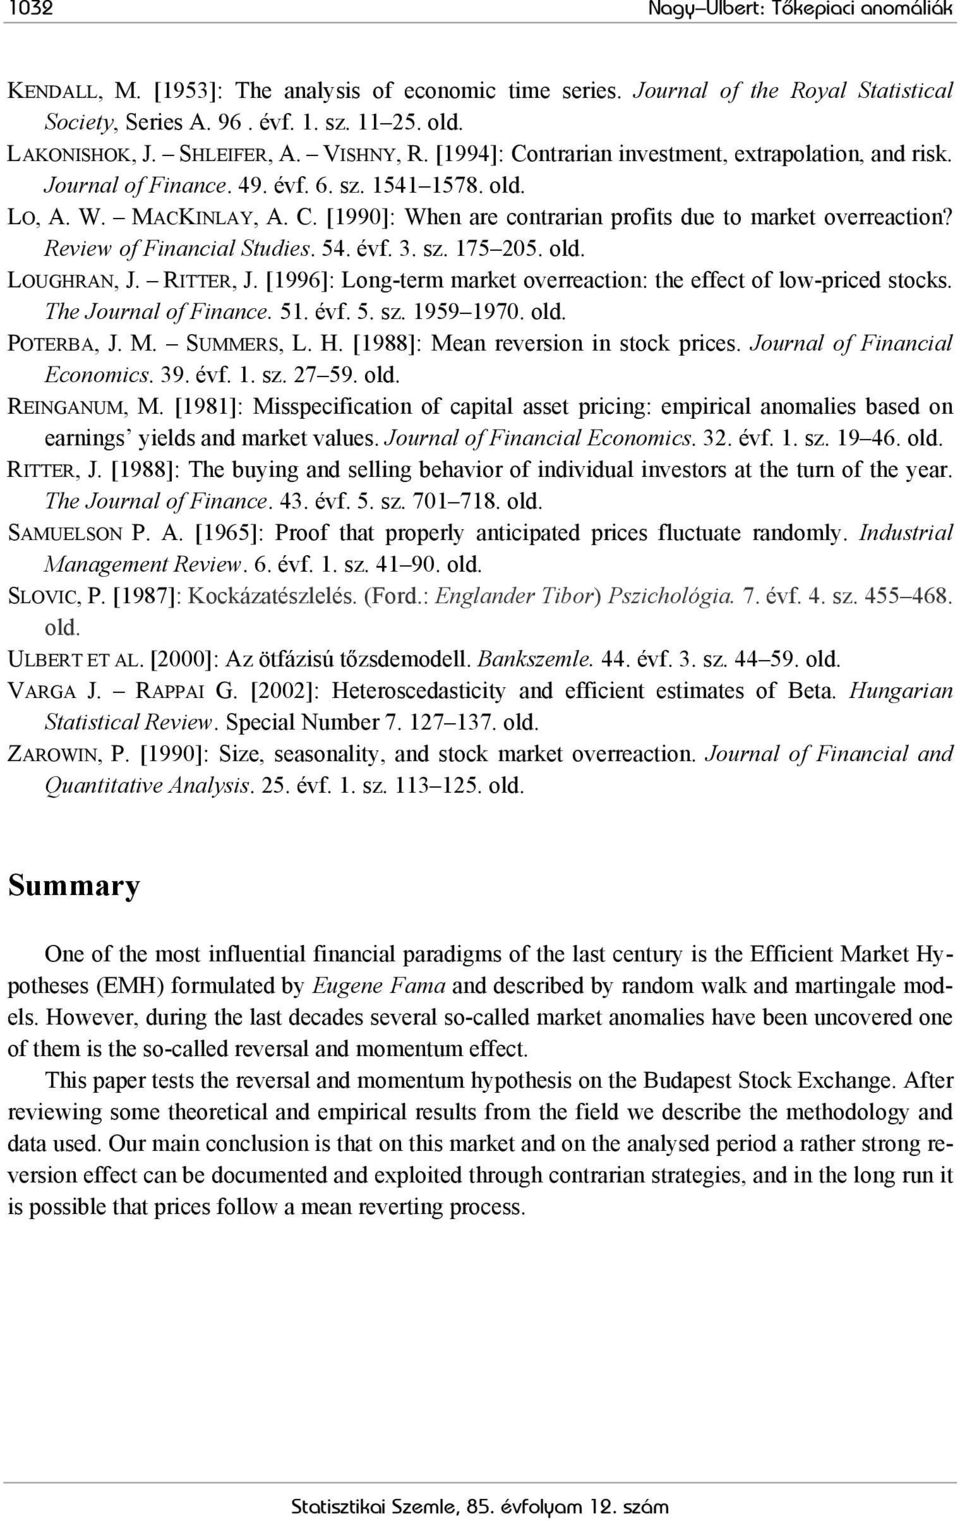 Review of Financial Studies. 54. évf. 3. sz. 175 205. old. LOUGHRAN, J. RITTER, J. [1996]: Long-term market overreaction: the effect of low-priced stocks. The Journal of Finance. 51. évf. 5. sz. 1959 1970.